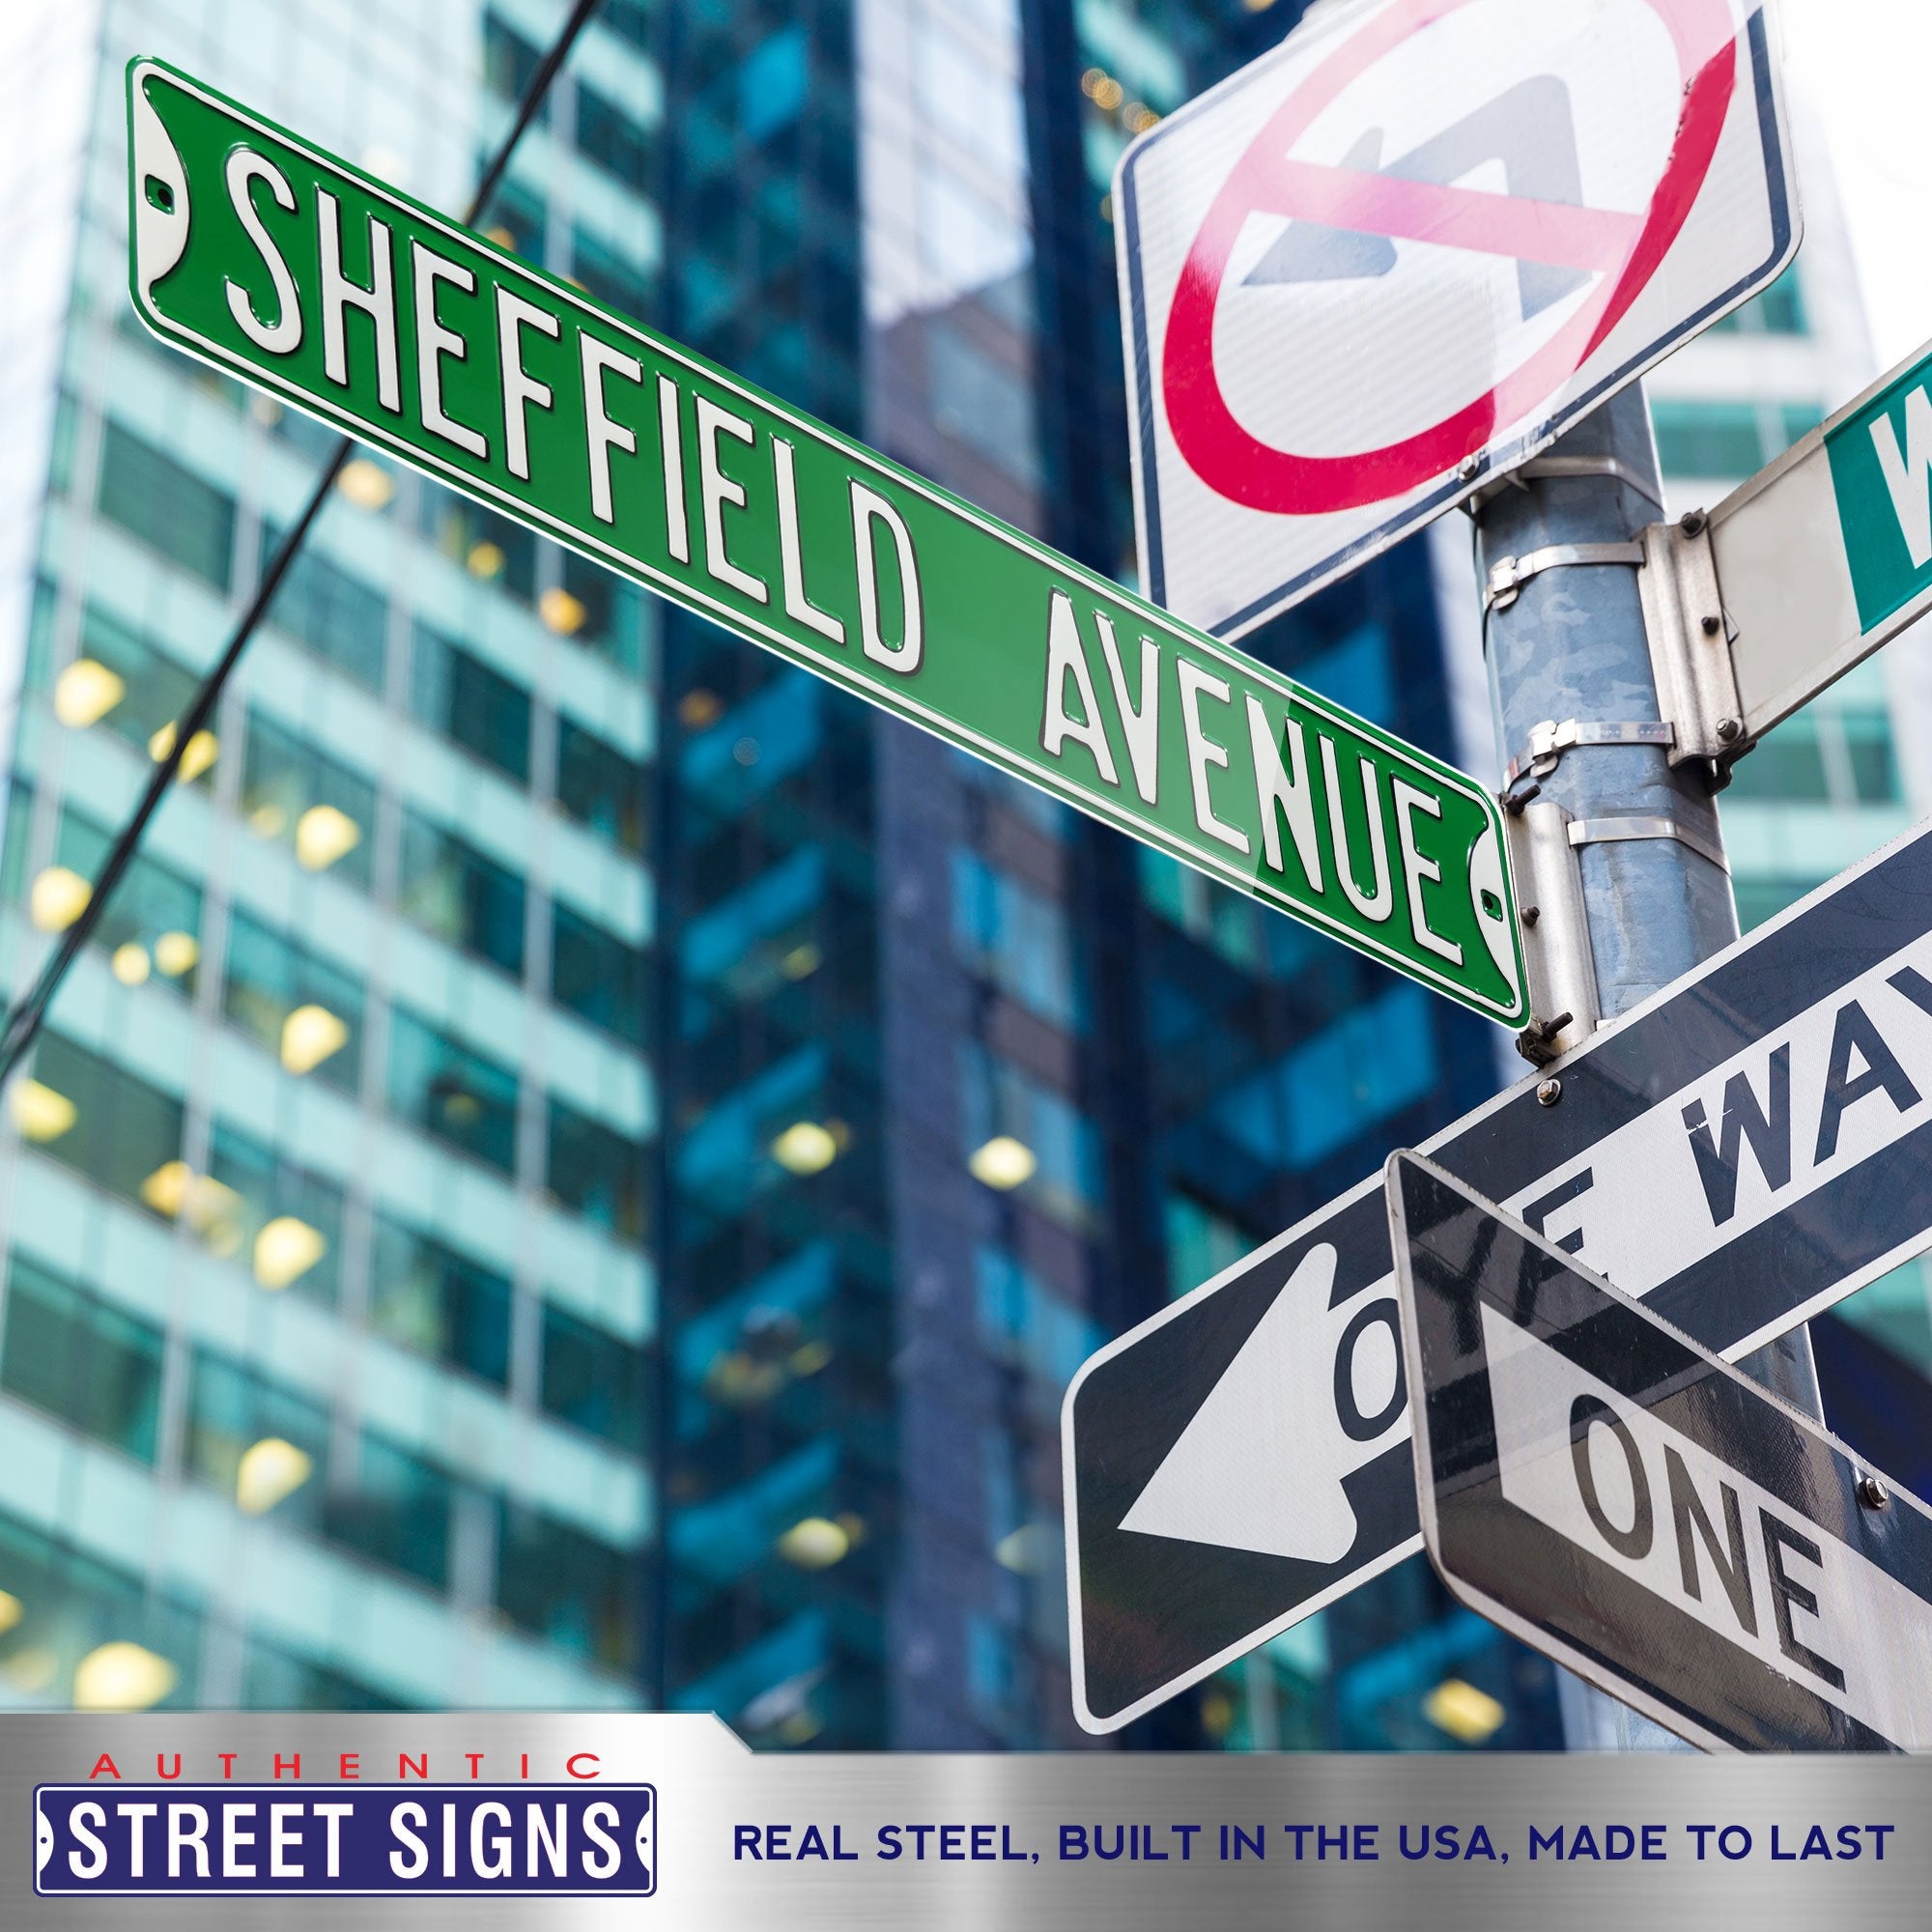 Chicago Cubs Steel Street Sign-SHEFFIELD AVENUE 36" W x 6" H by Fathead